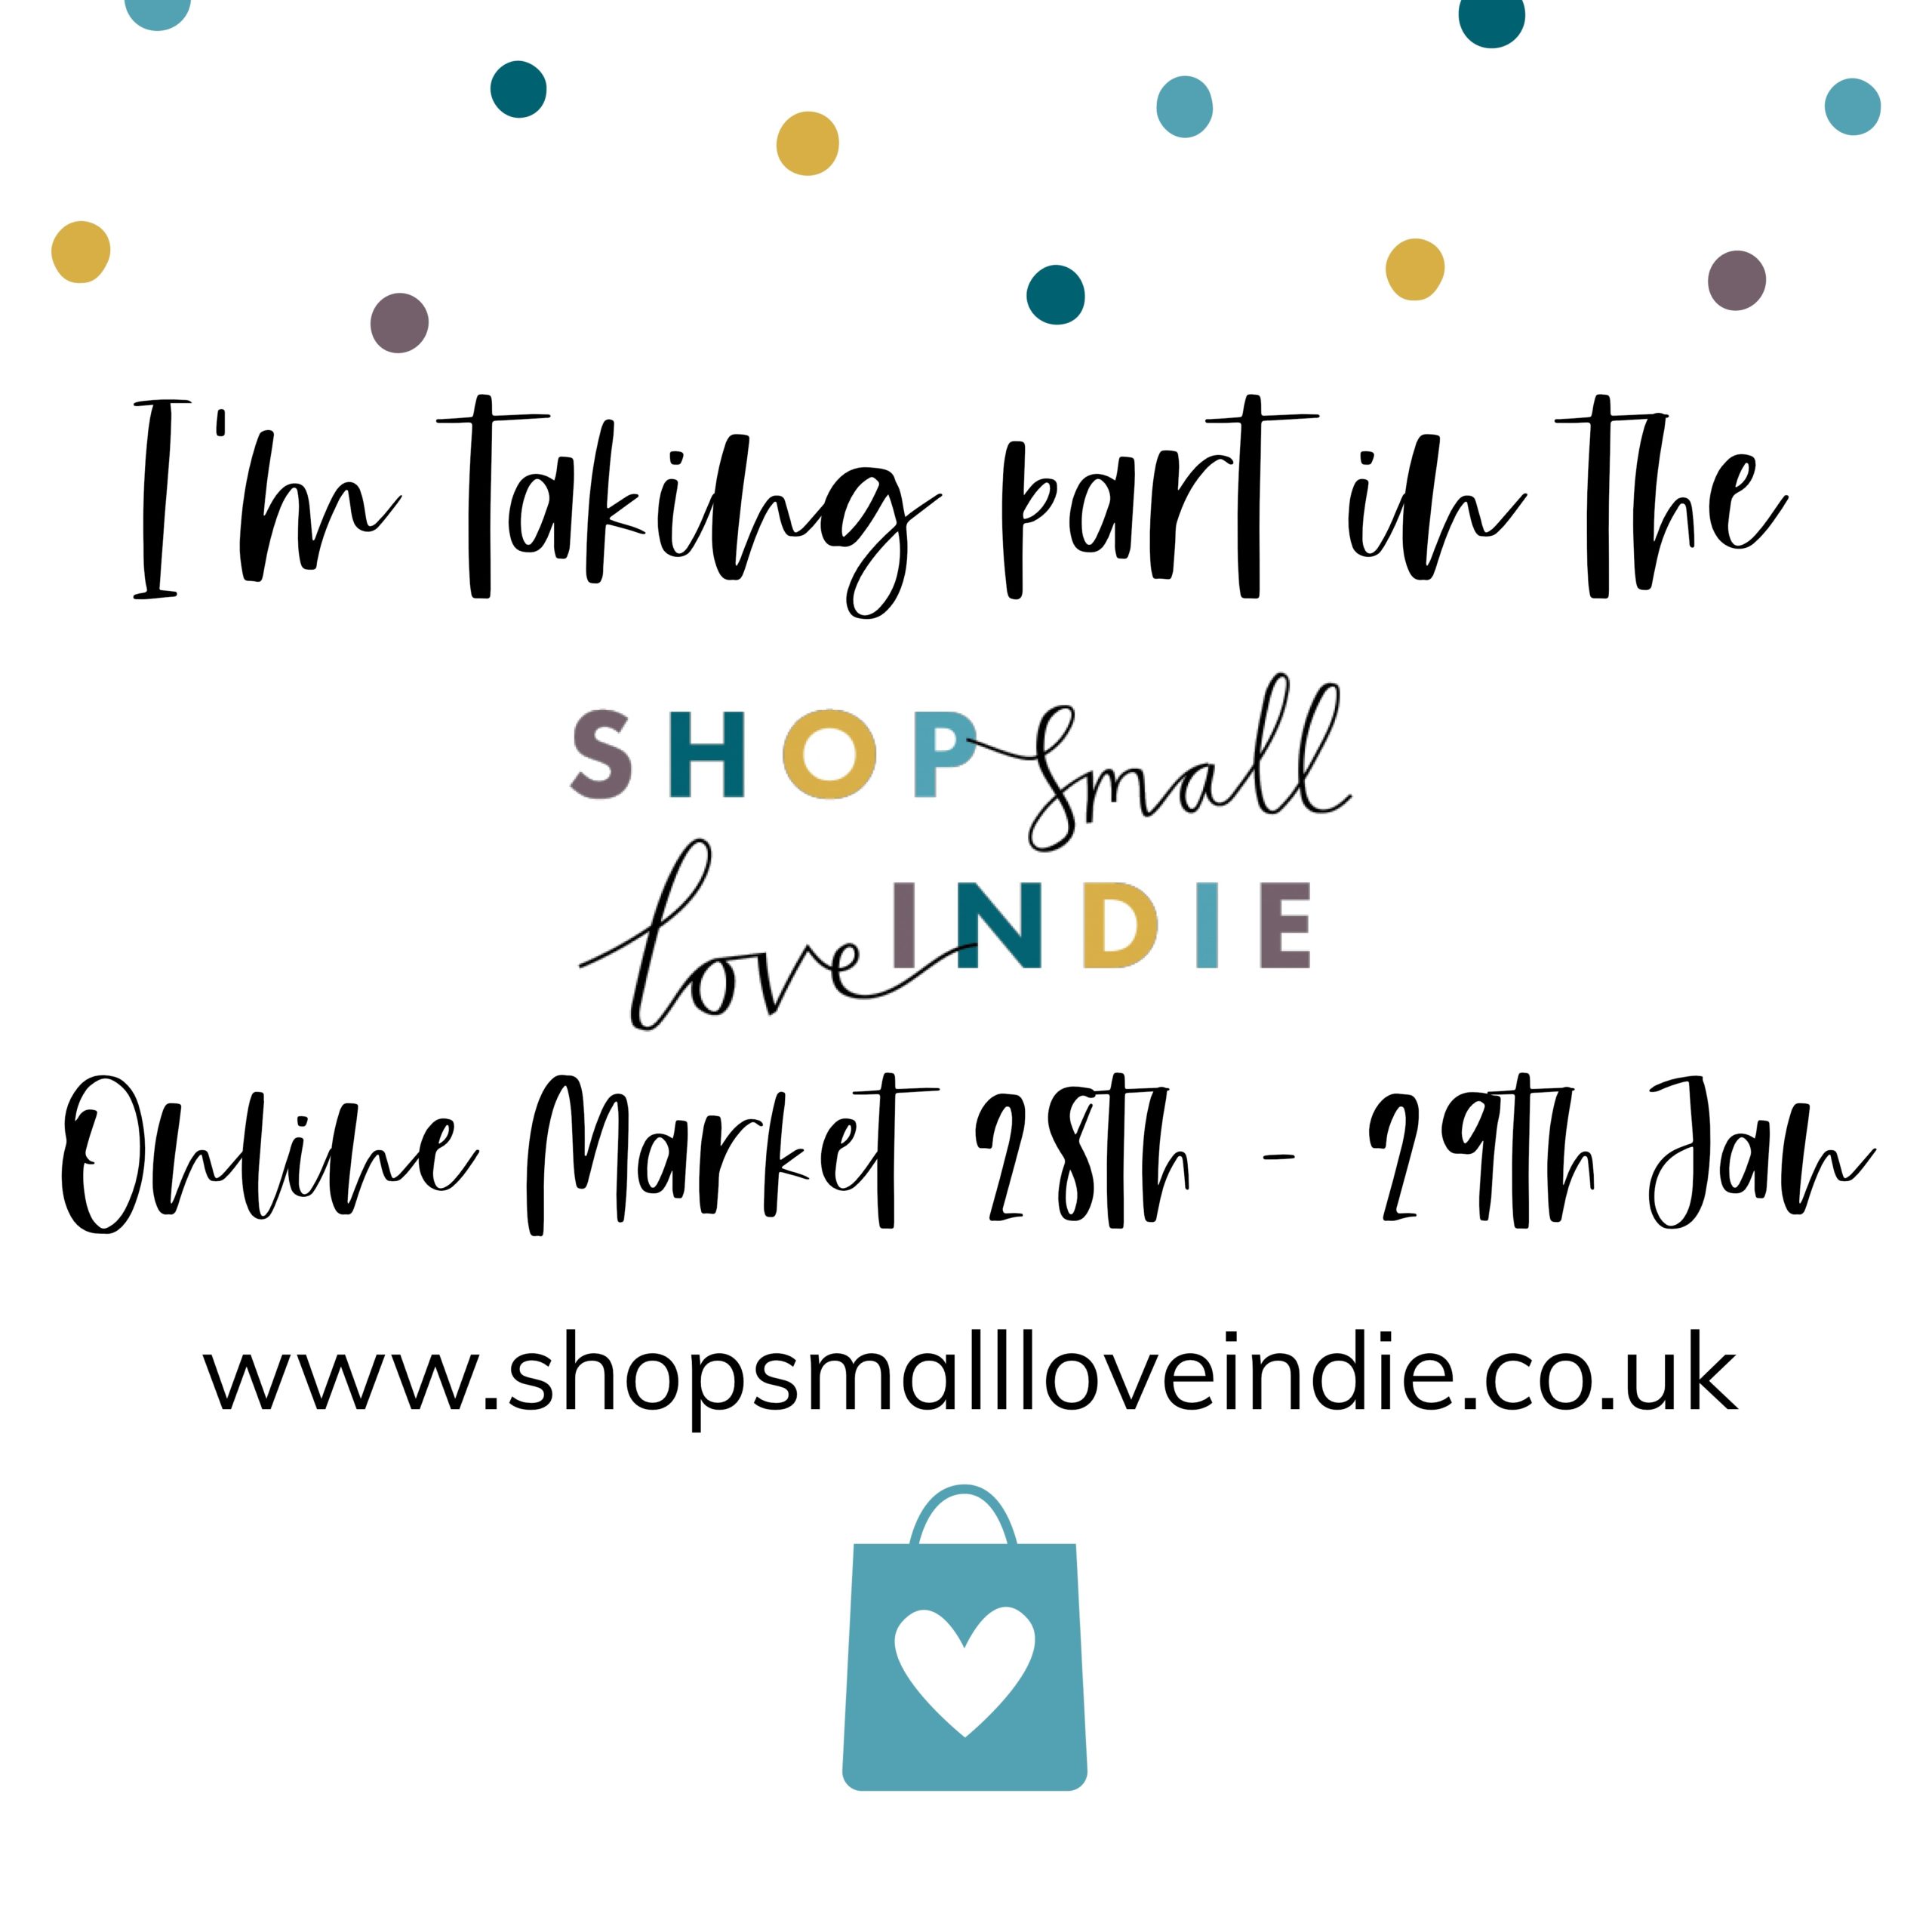 I am taking part in the next Shop Small Love Indie Online Market 28th - 29th Jan 2022 www.shopsmallloveindie.co.uk